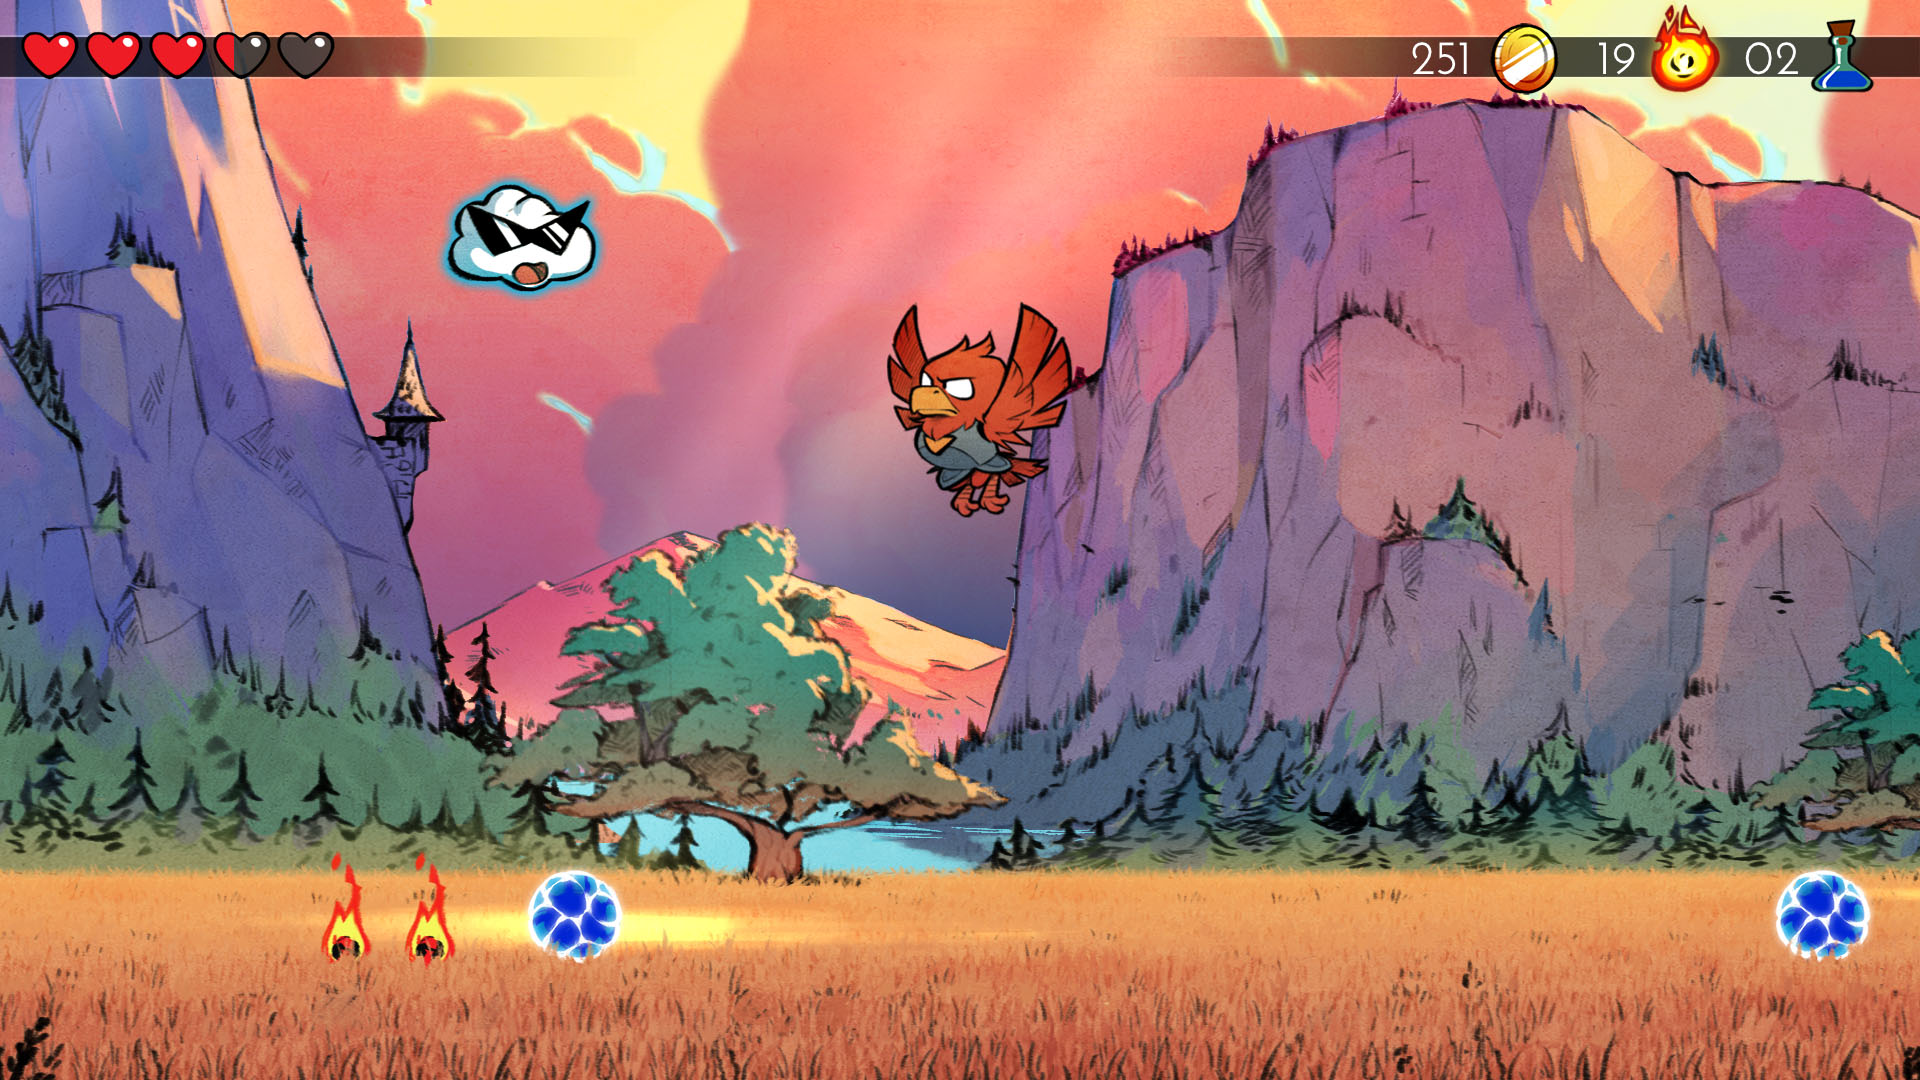 Wonder Boy : The Dragon’s Trap released for PS4, XB1 and Nintendo Switch